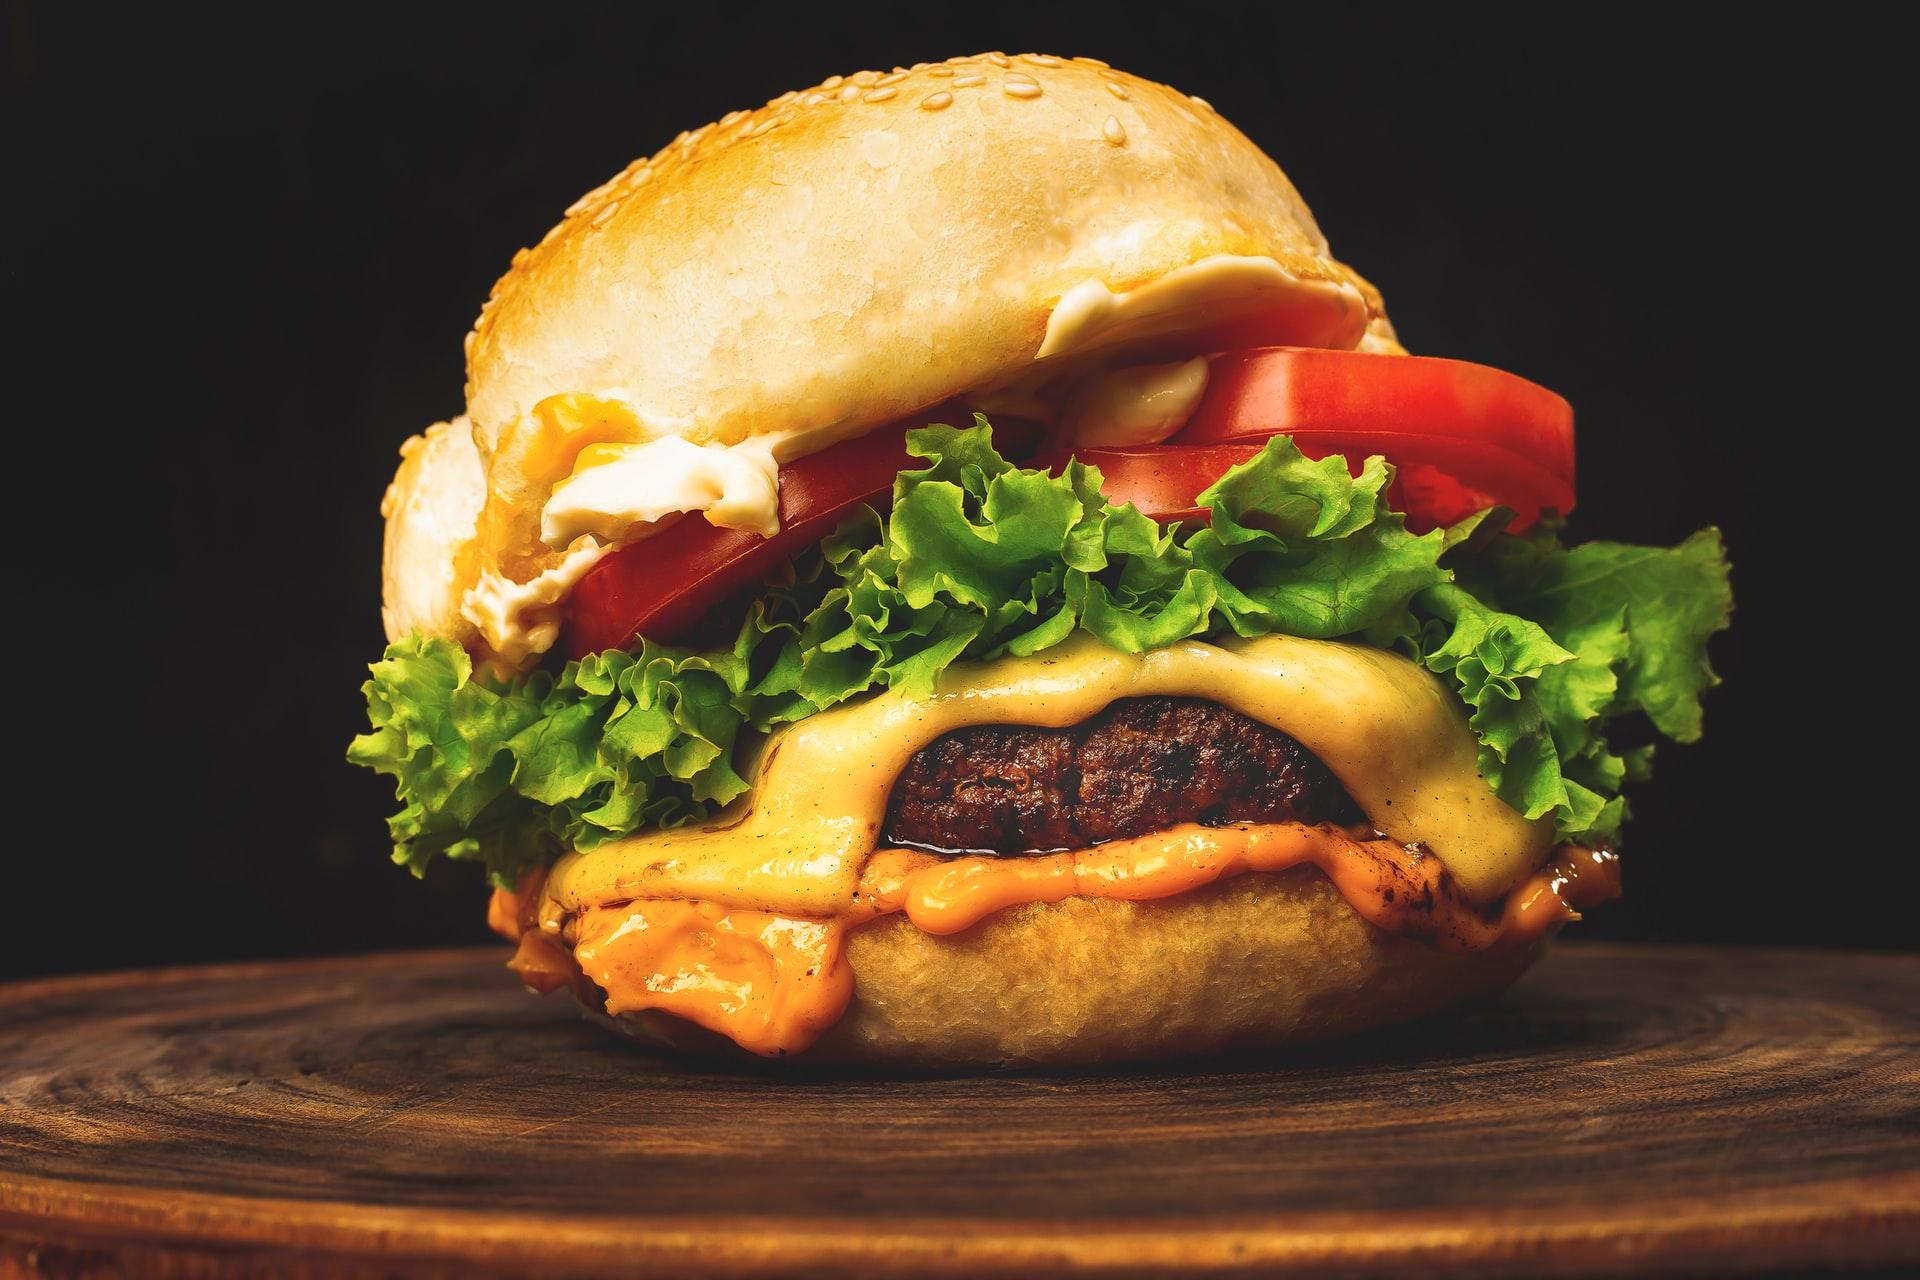 Gourmet Burger Kitchen acquired by Boparan in deal that sees 26 sites close